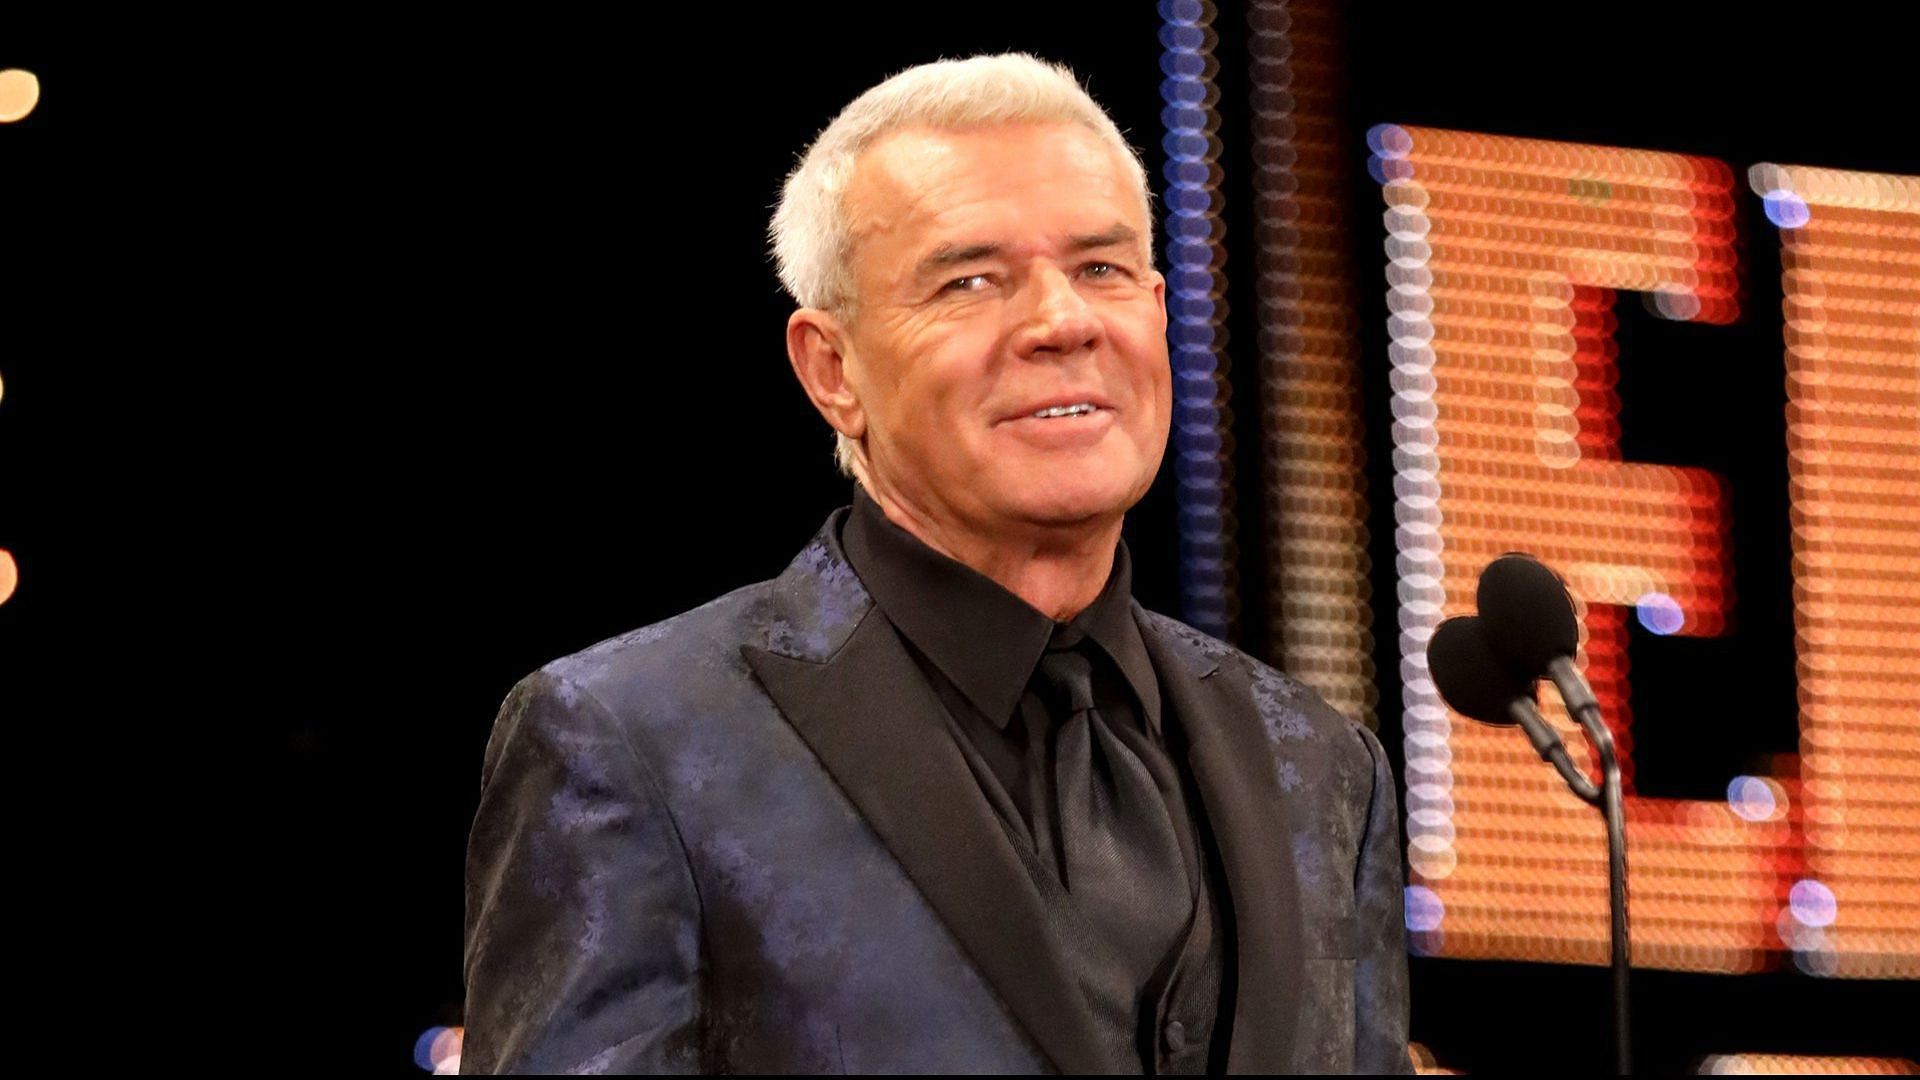 Eric Bischoff was a former WCW General Manager